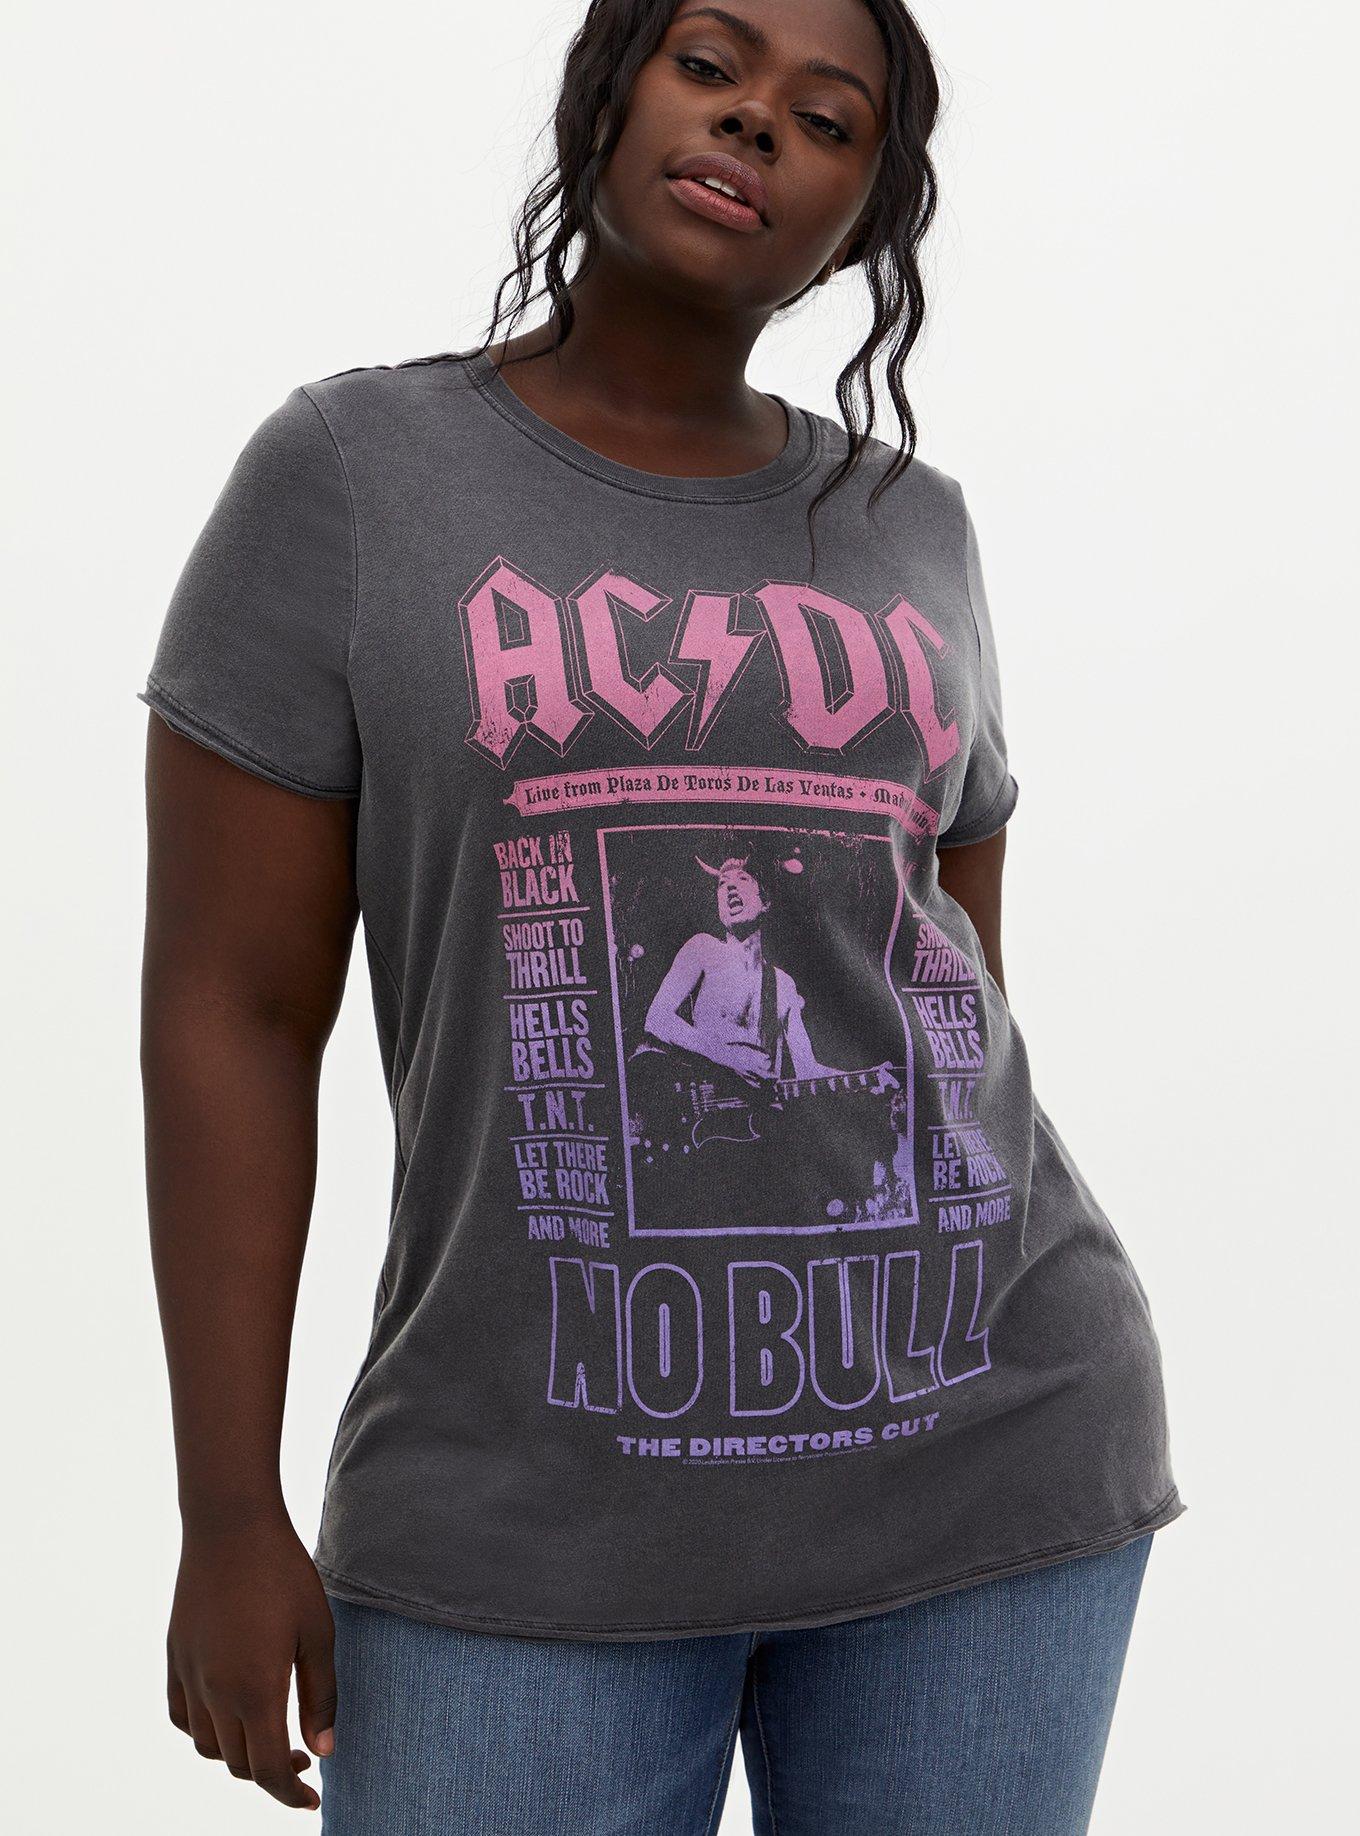 Acdc Back in Black Graphite Heather Adult T-Shirt Tee